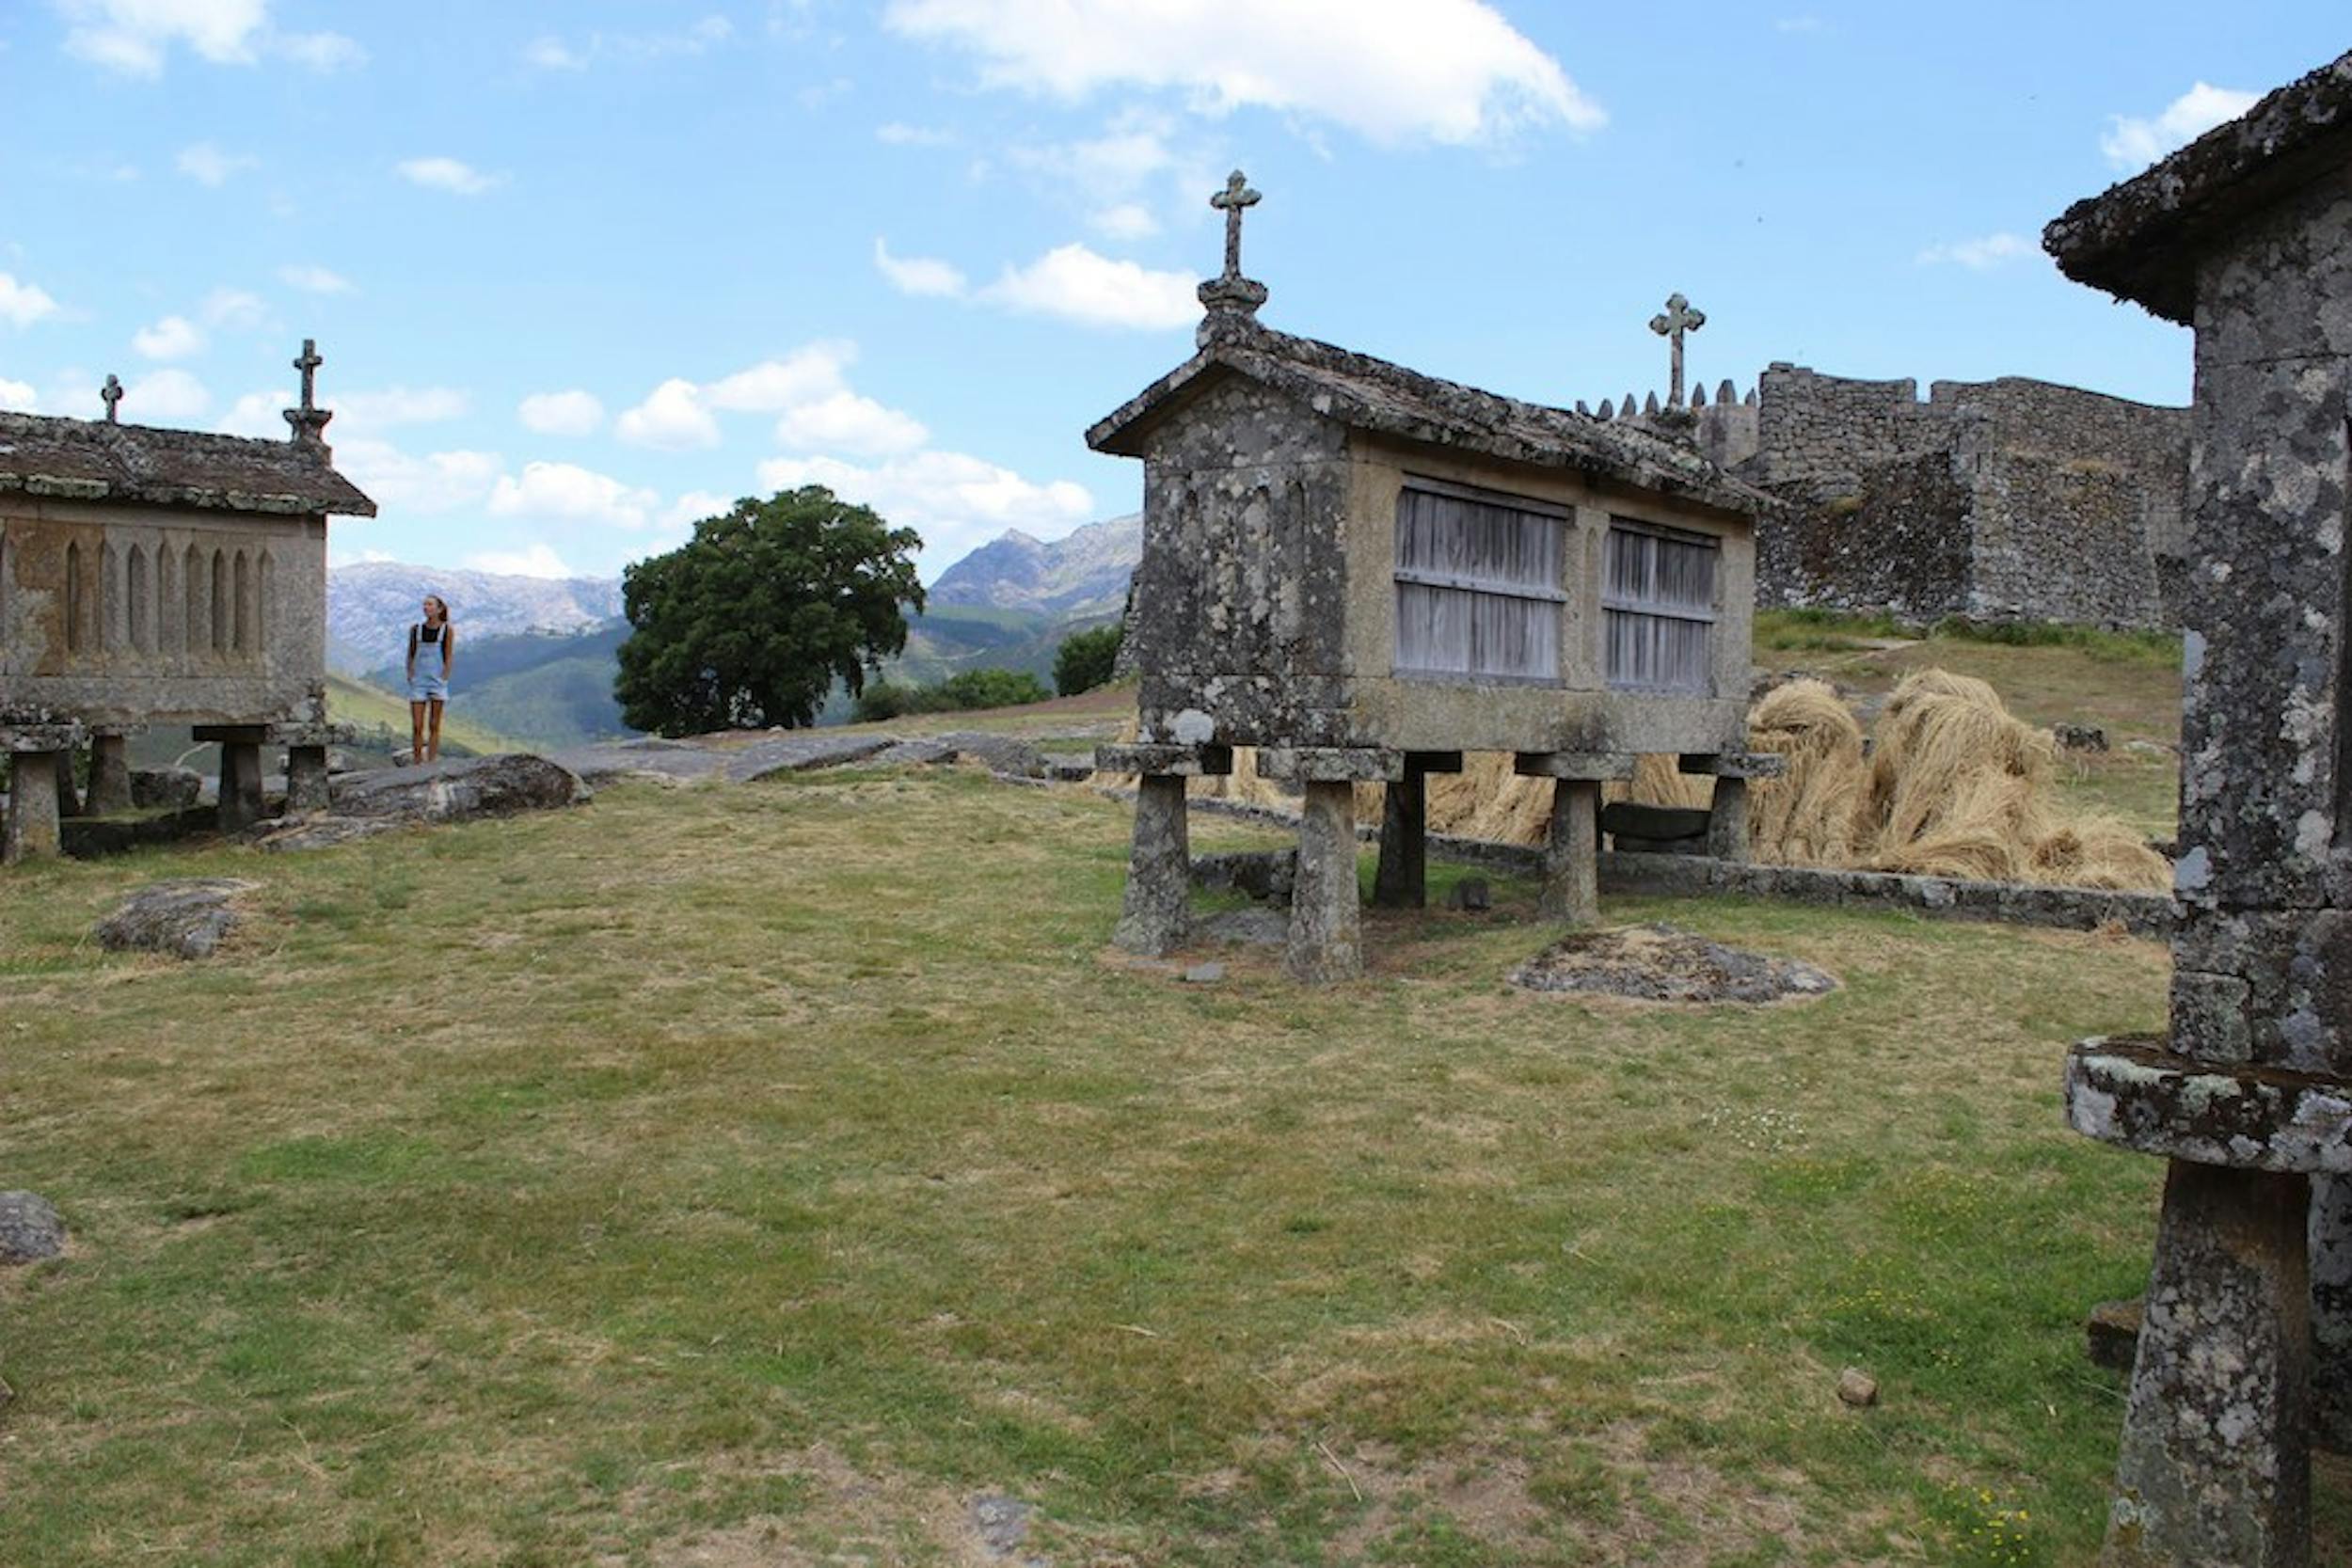 Village of Soajo with its monumental granaries.